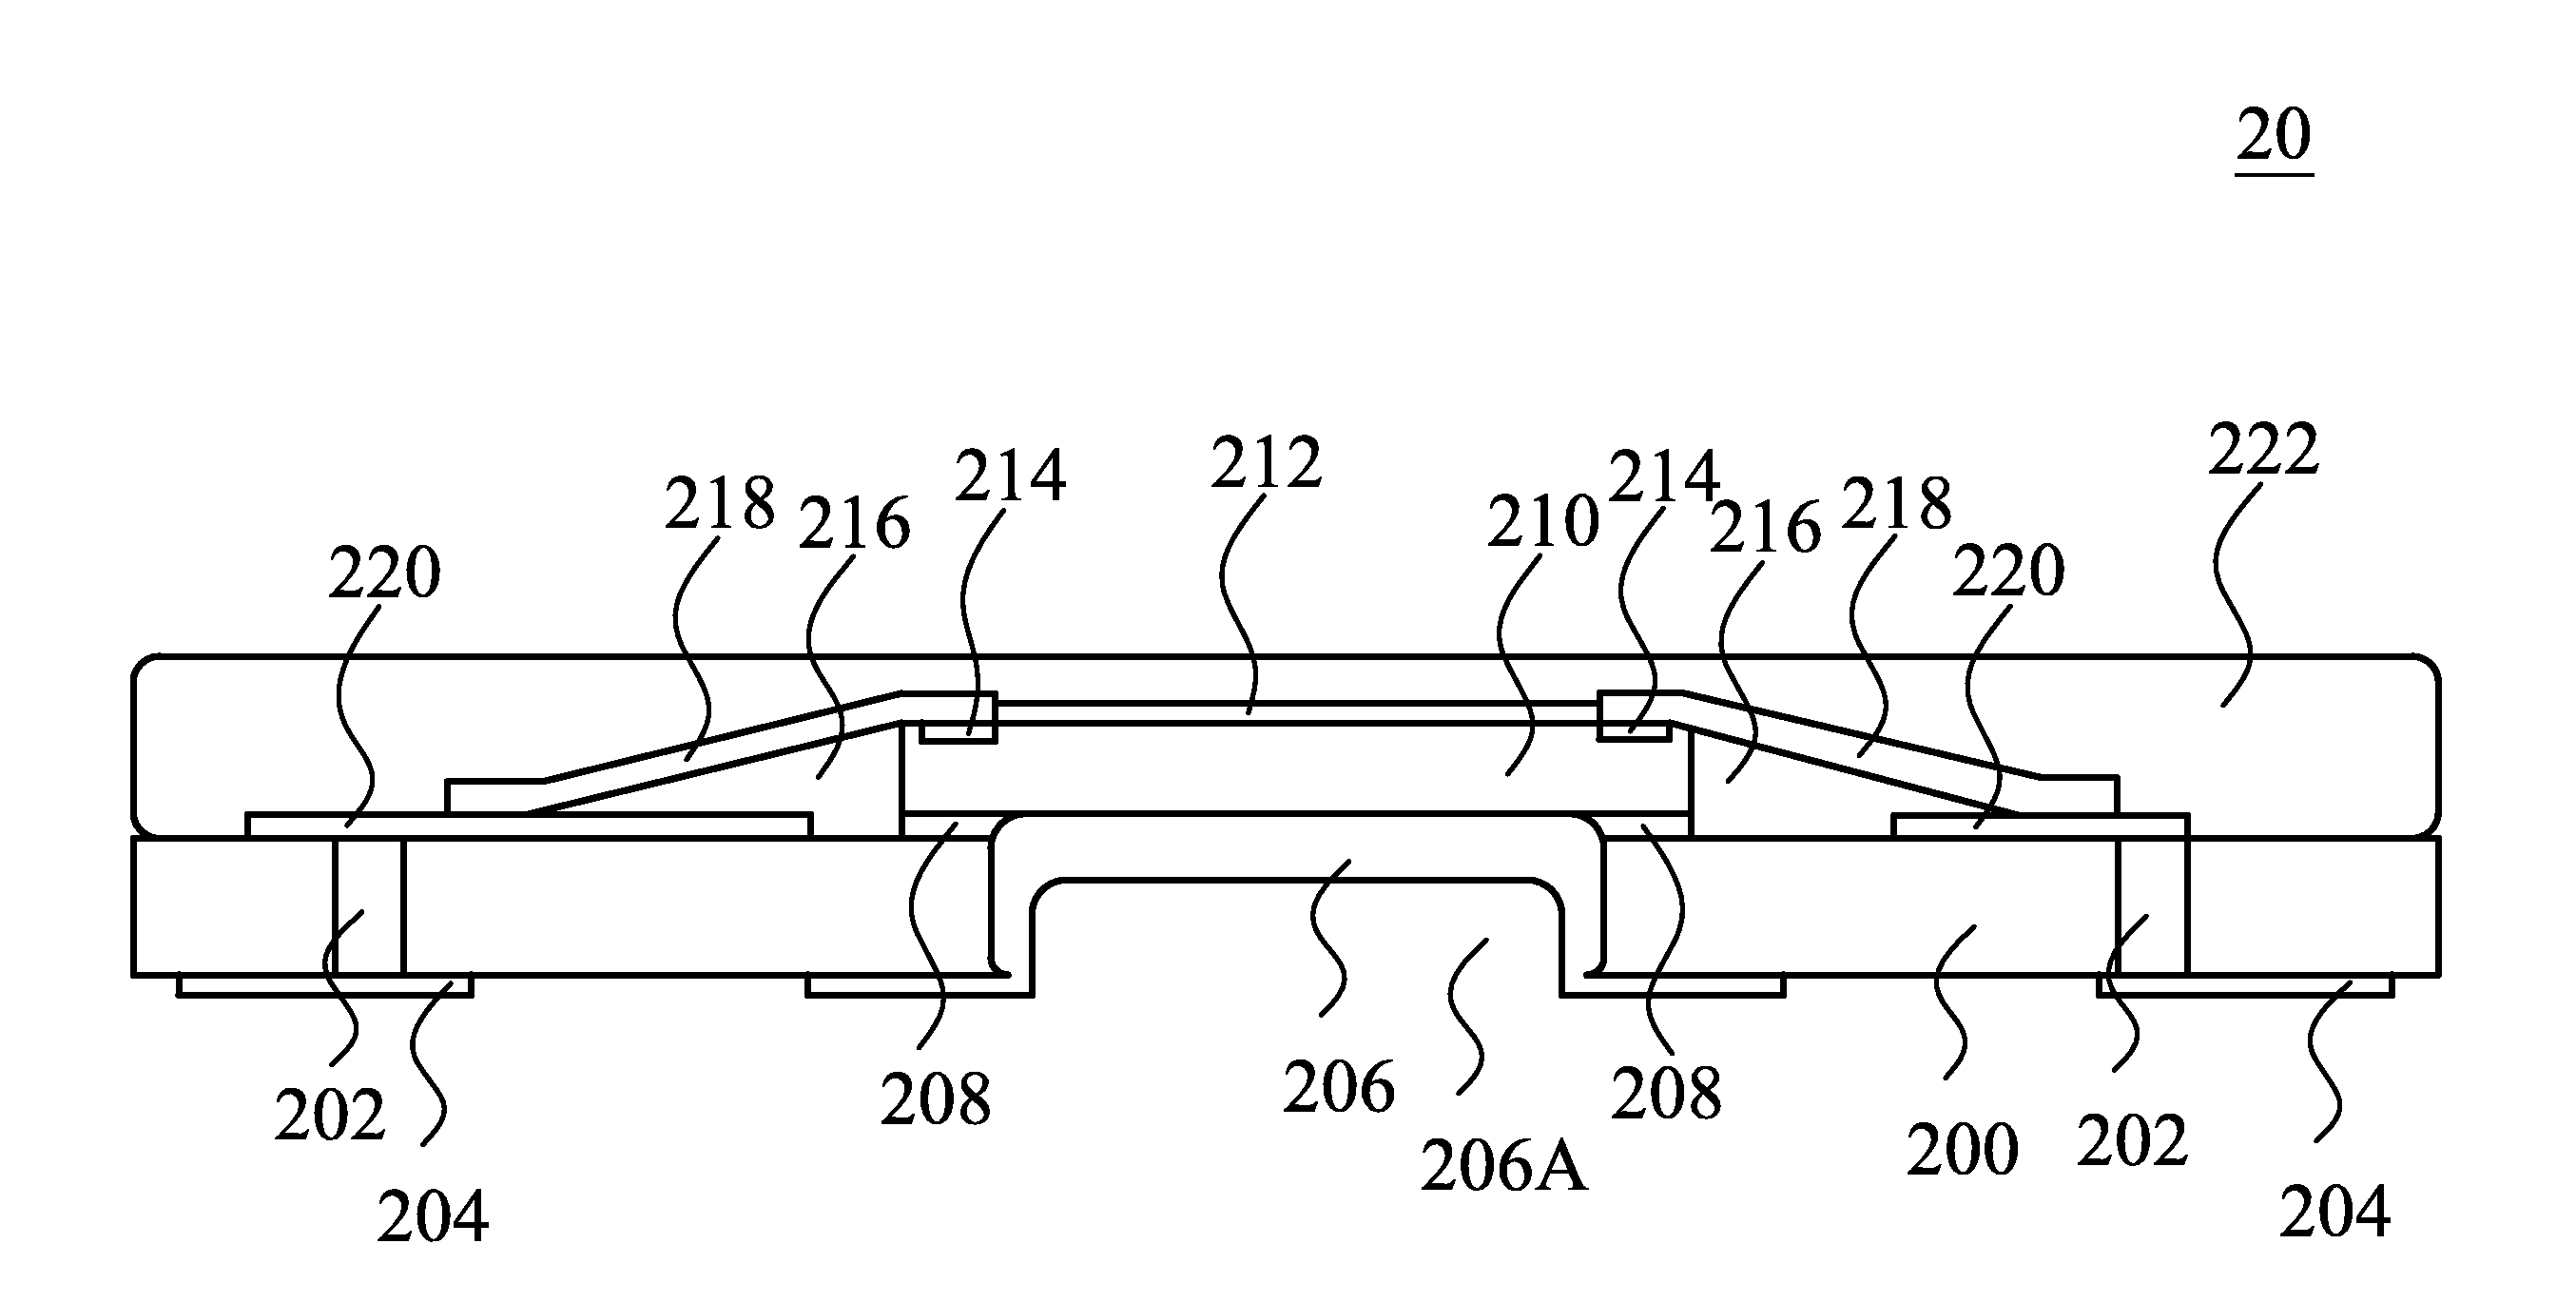 Semiconductor Device Package with Slanting Structures